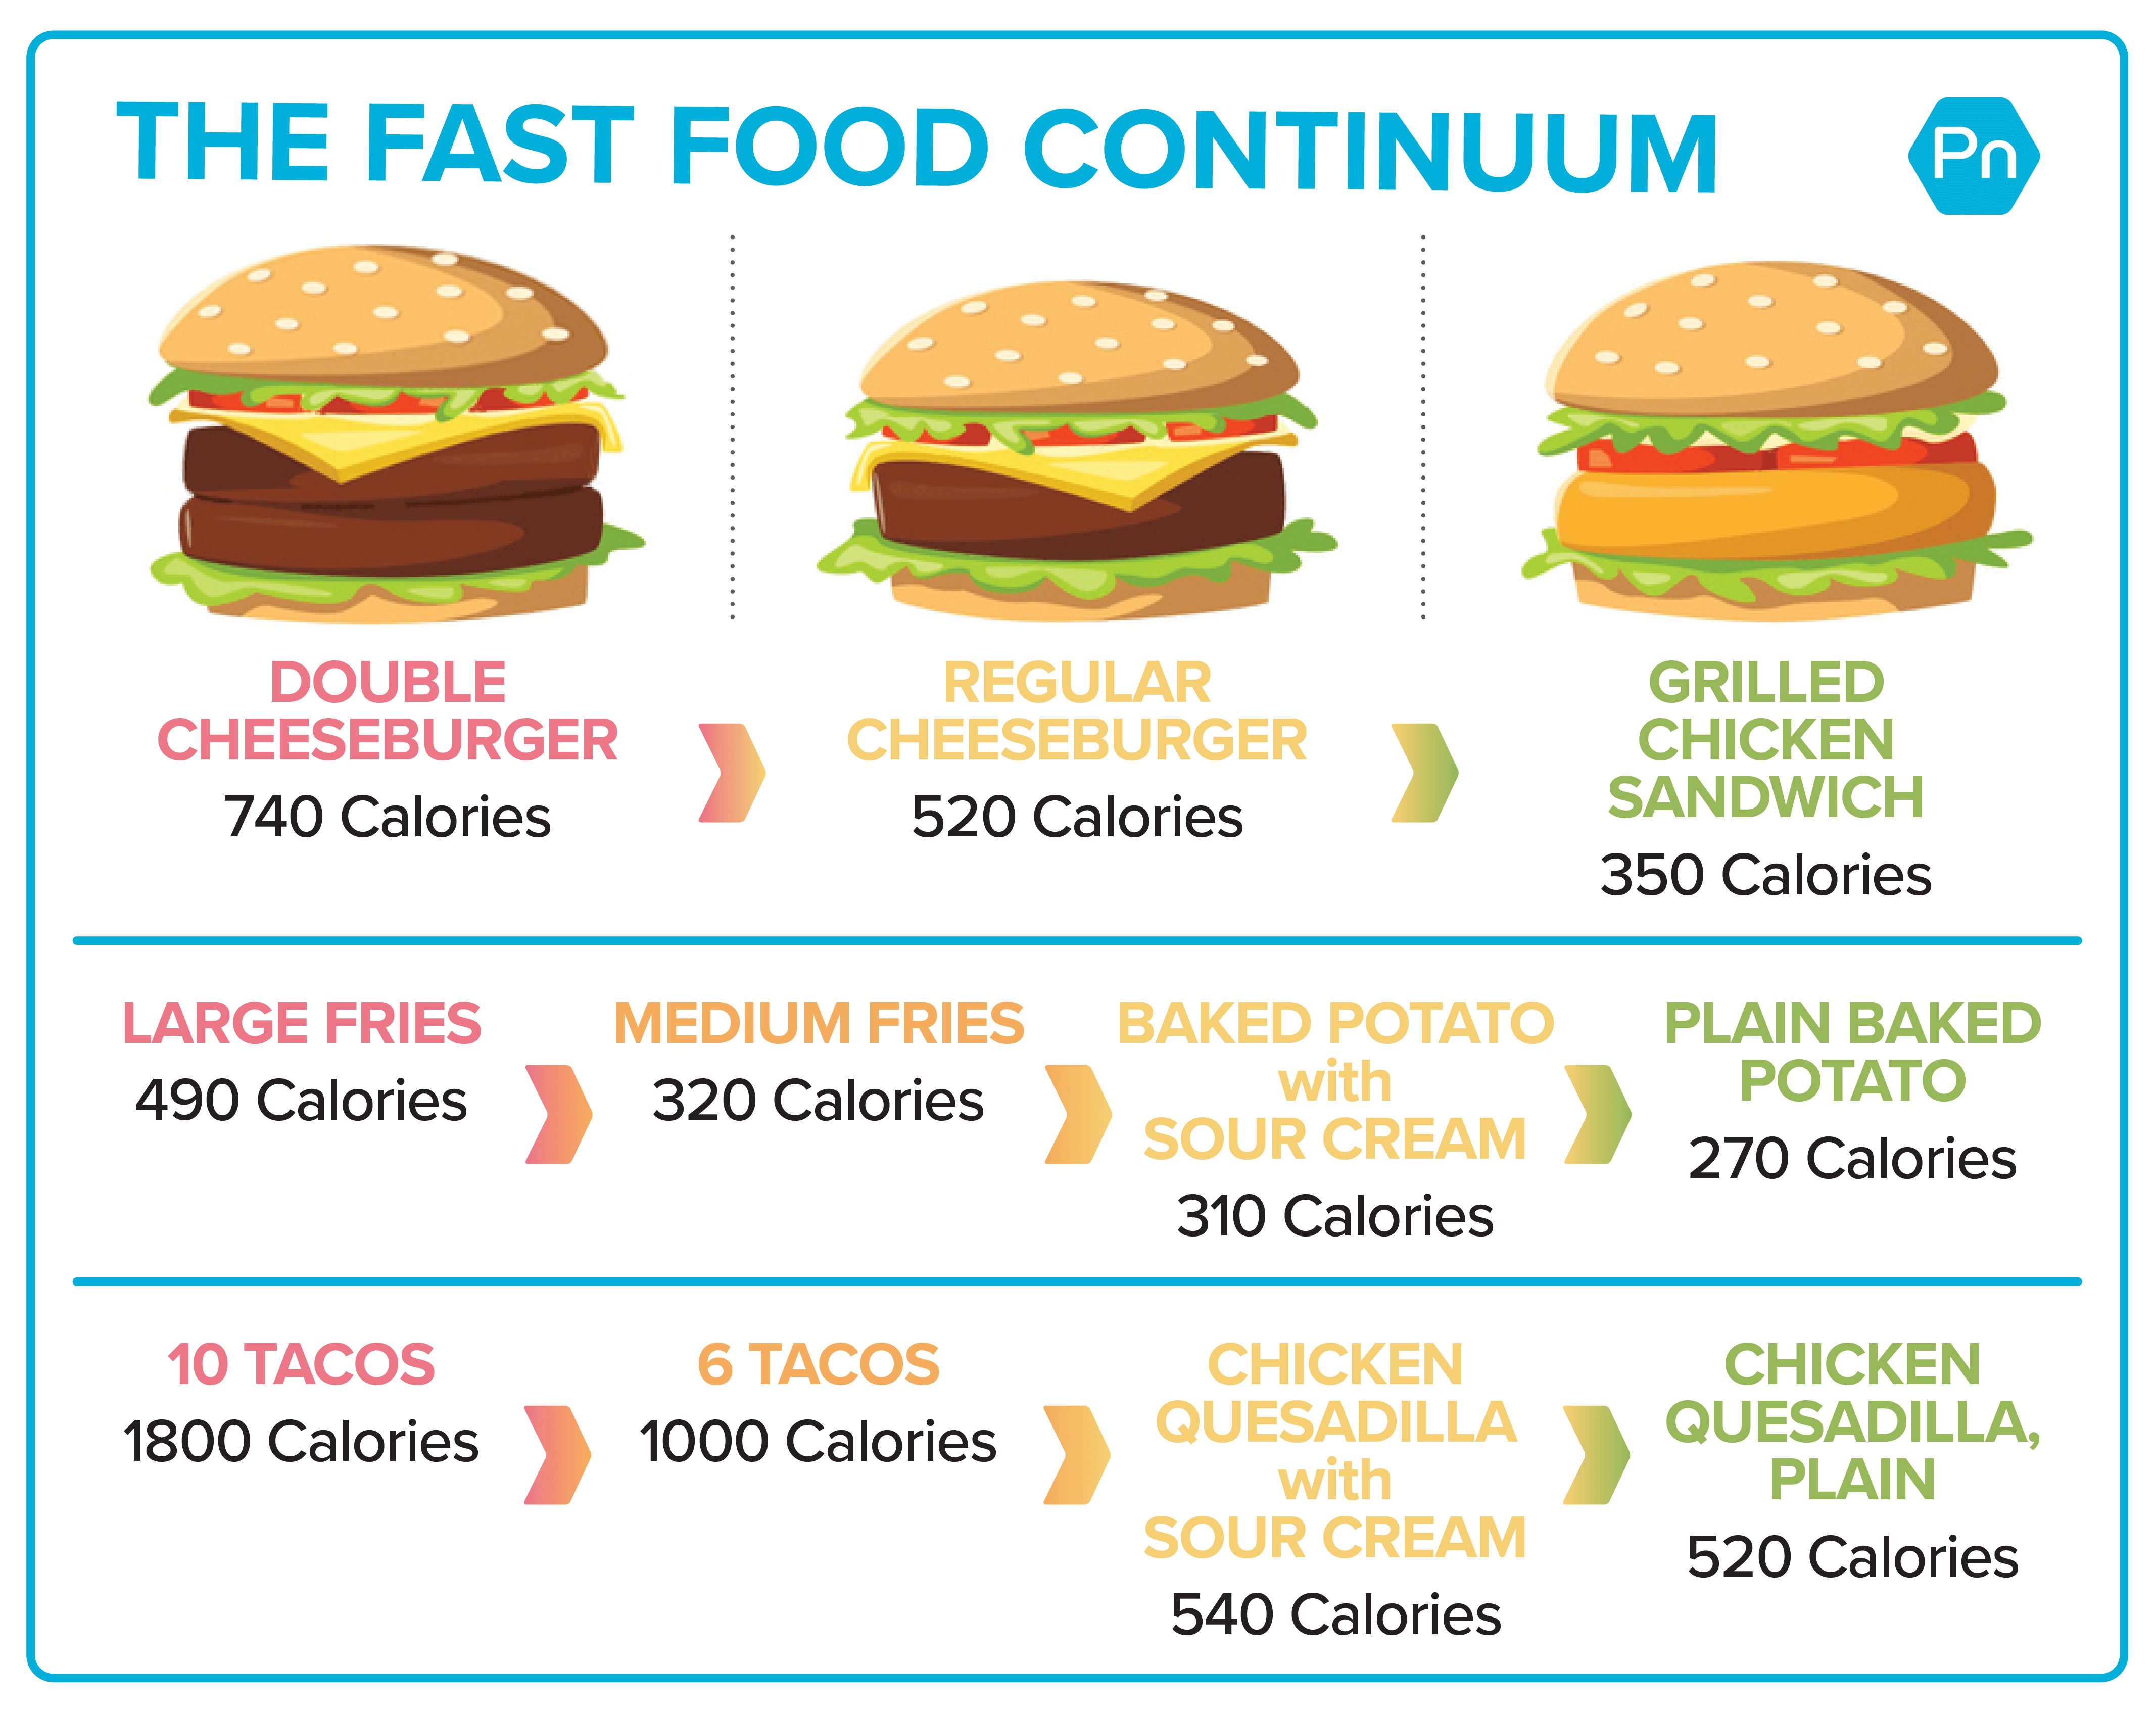 Graphical depiction of several fast supplies options: Double cheeseburger (740 Calories), regular cheeseburger (520 Calories), grilled yellow sandwich (350 Calories), large fries (490 Calories), medium fries (320 Calories), baked potato with sour surf (310 Calories), baked potato without sour surf (270 Calories), 10 tacos (1800 Calories), 6 tacos (1000 Calories), yellow quesadilla with sour surf (540 Calories), yellow quesadilla plain (520 Calories). 